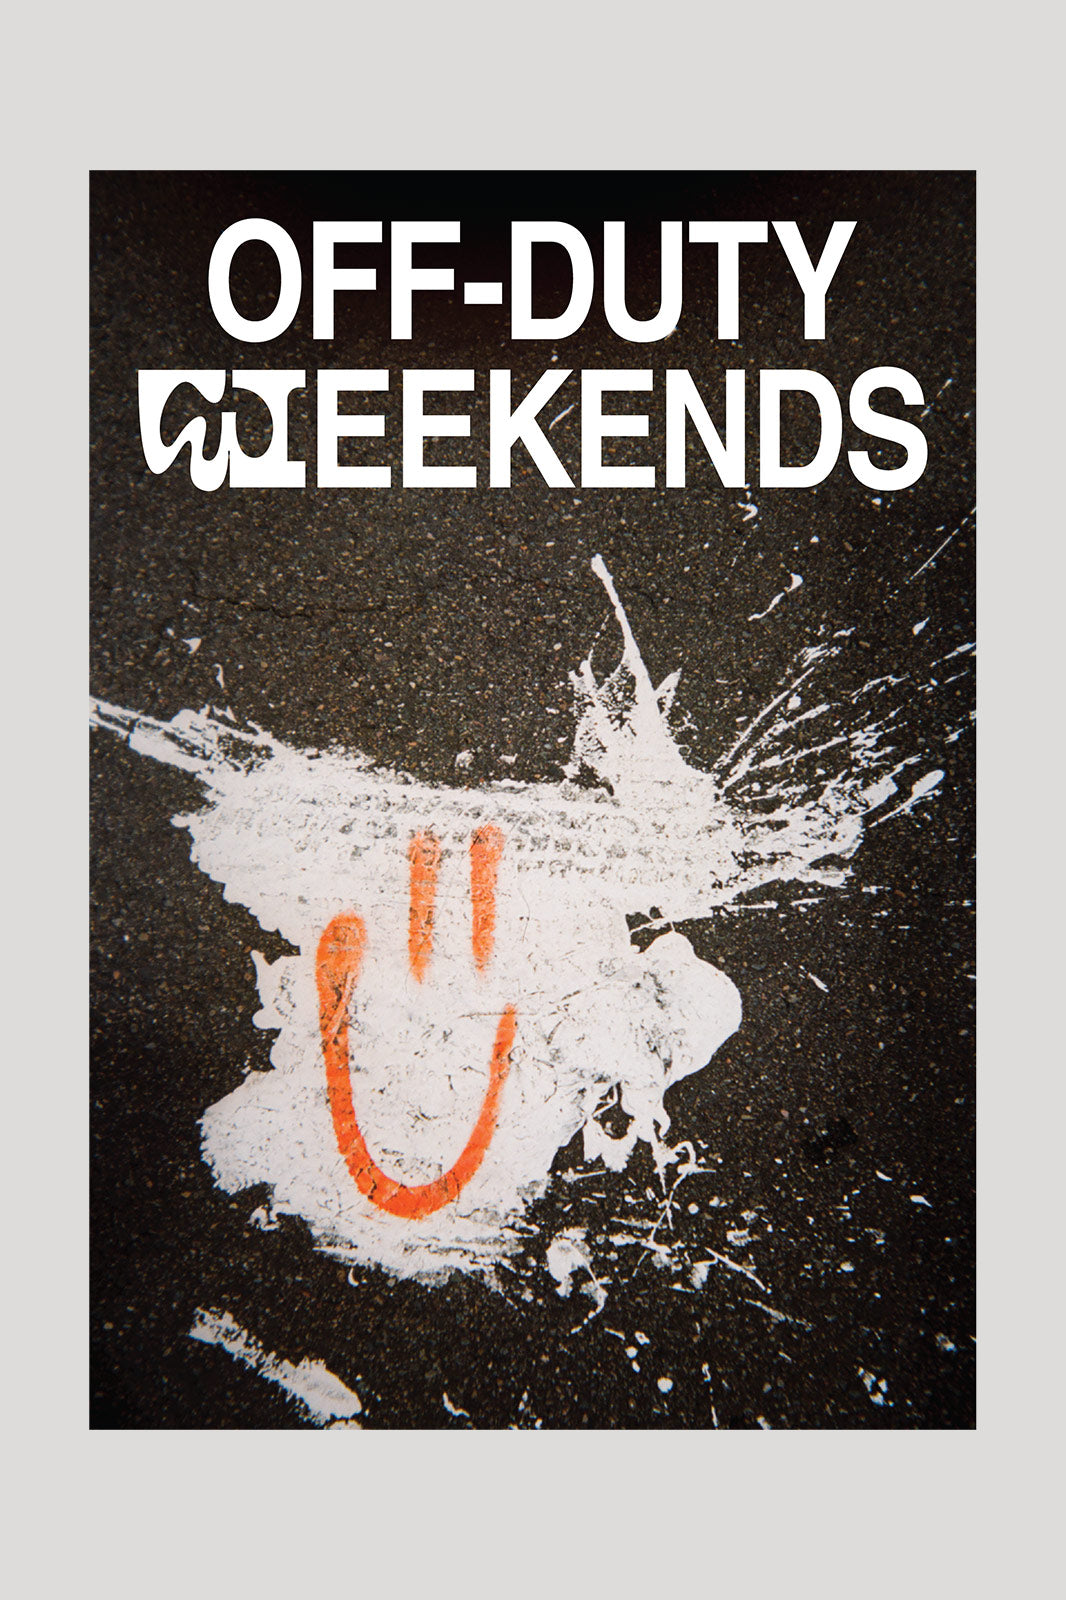 Flat preview of the Duties Smiley print poster featuring a spray-painted smiley face on a white paint splash on the ground, with text saying 'OFF-DUTY WEEKENDS'.